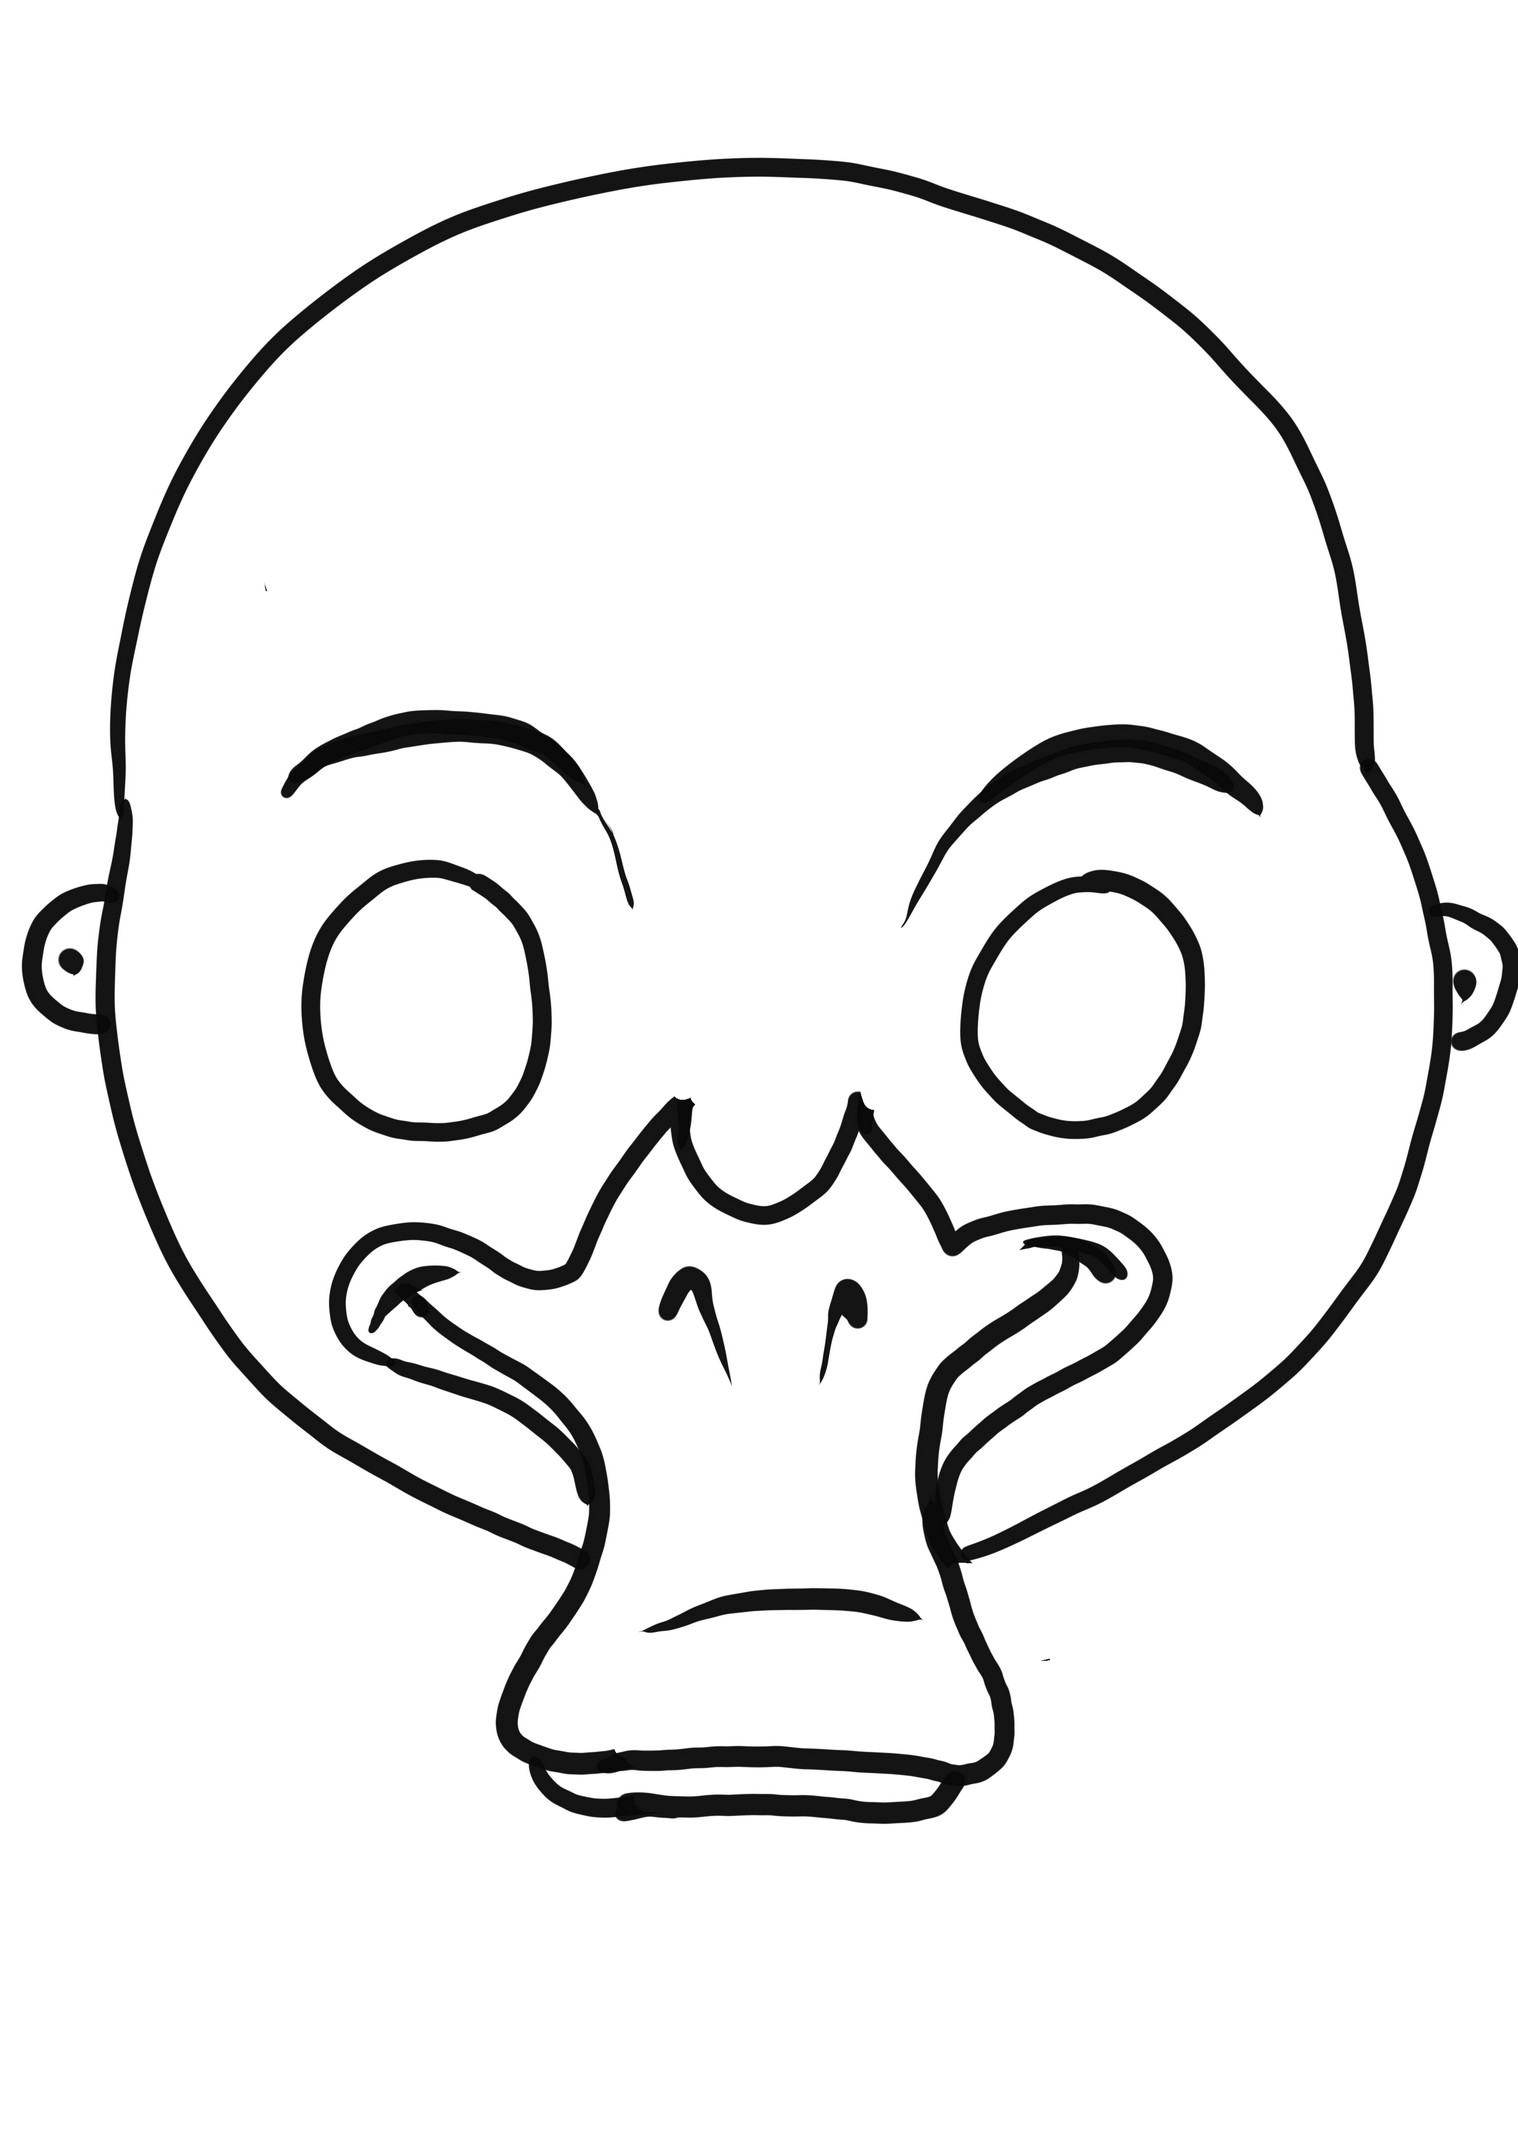 Duck mask coloring page